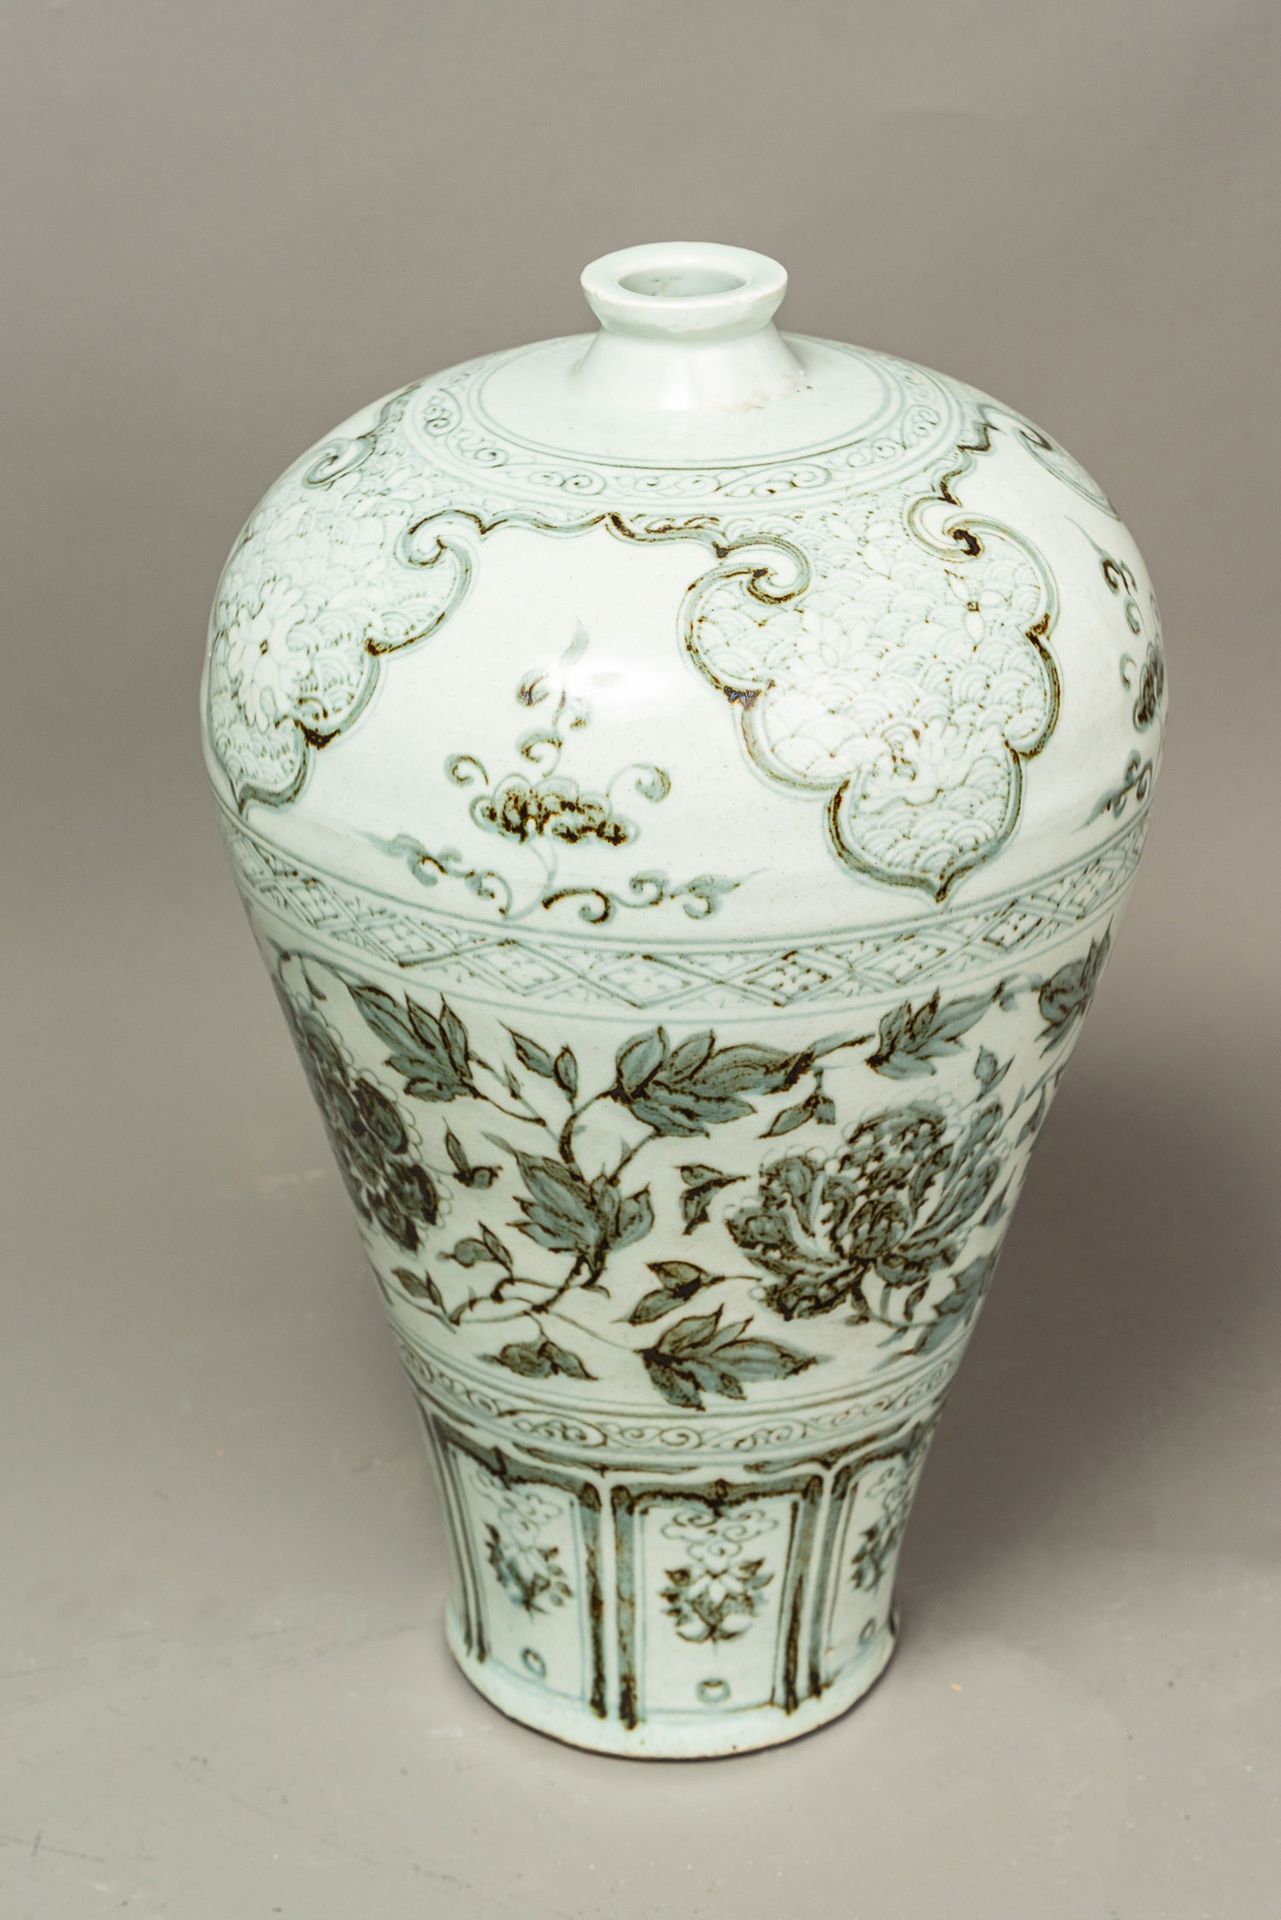 Chinese Mei-Ping Vase Vase chinois Mei-Ping, porcelaine, forme conique avec peti&hellip;